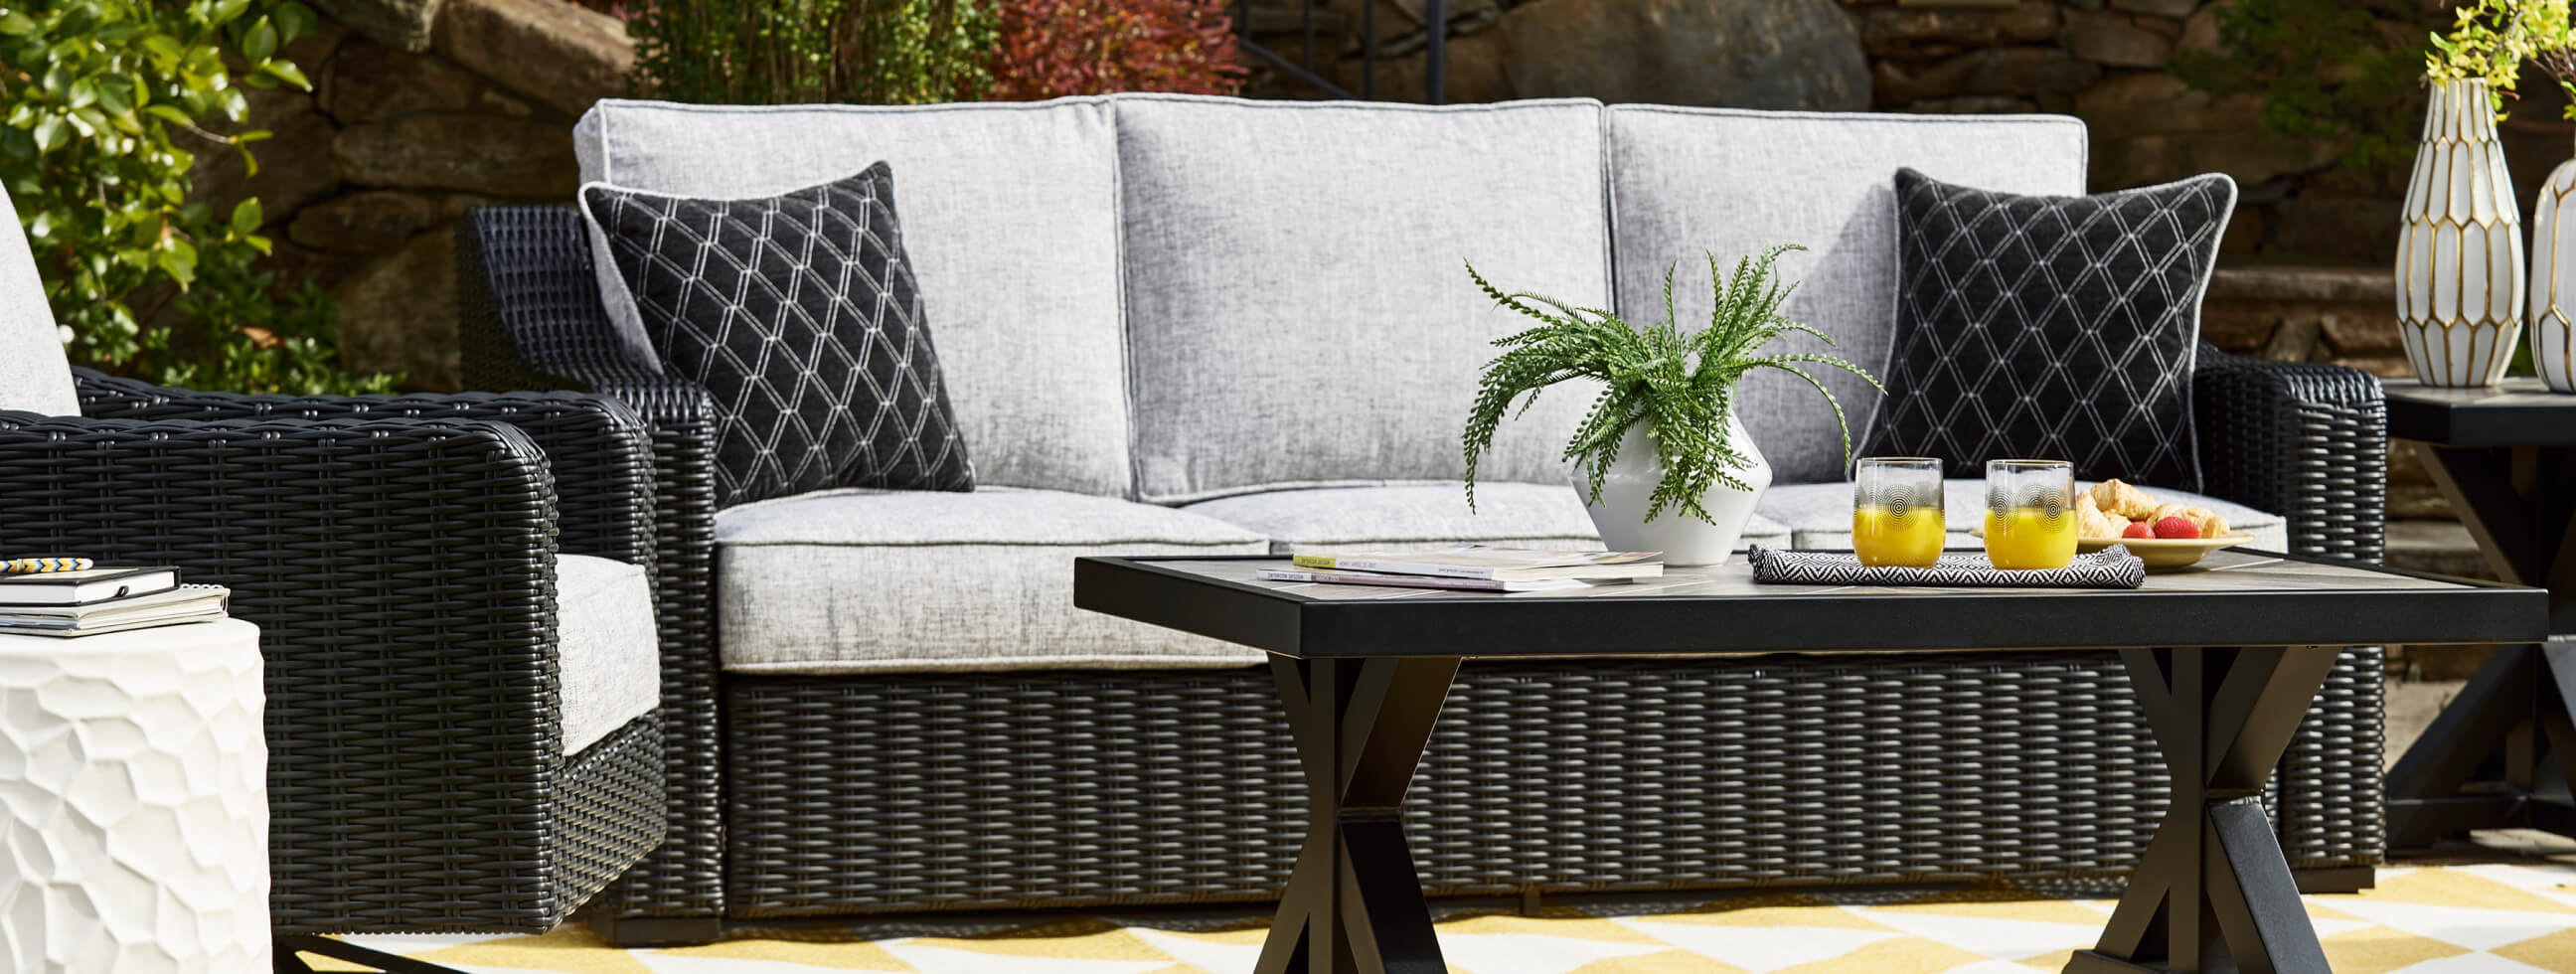 Blackcroft Style Outdoor Dining Set